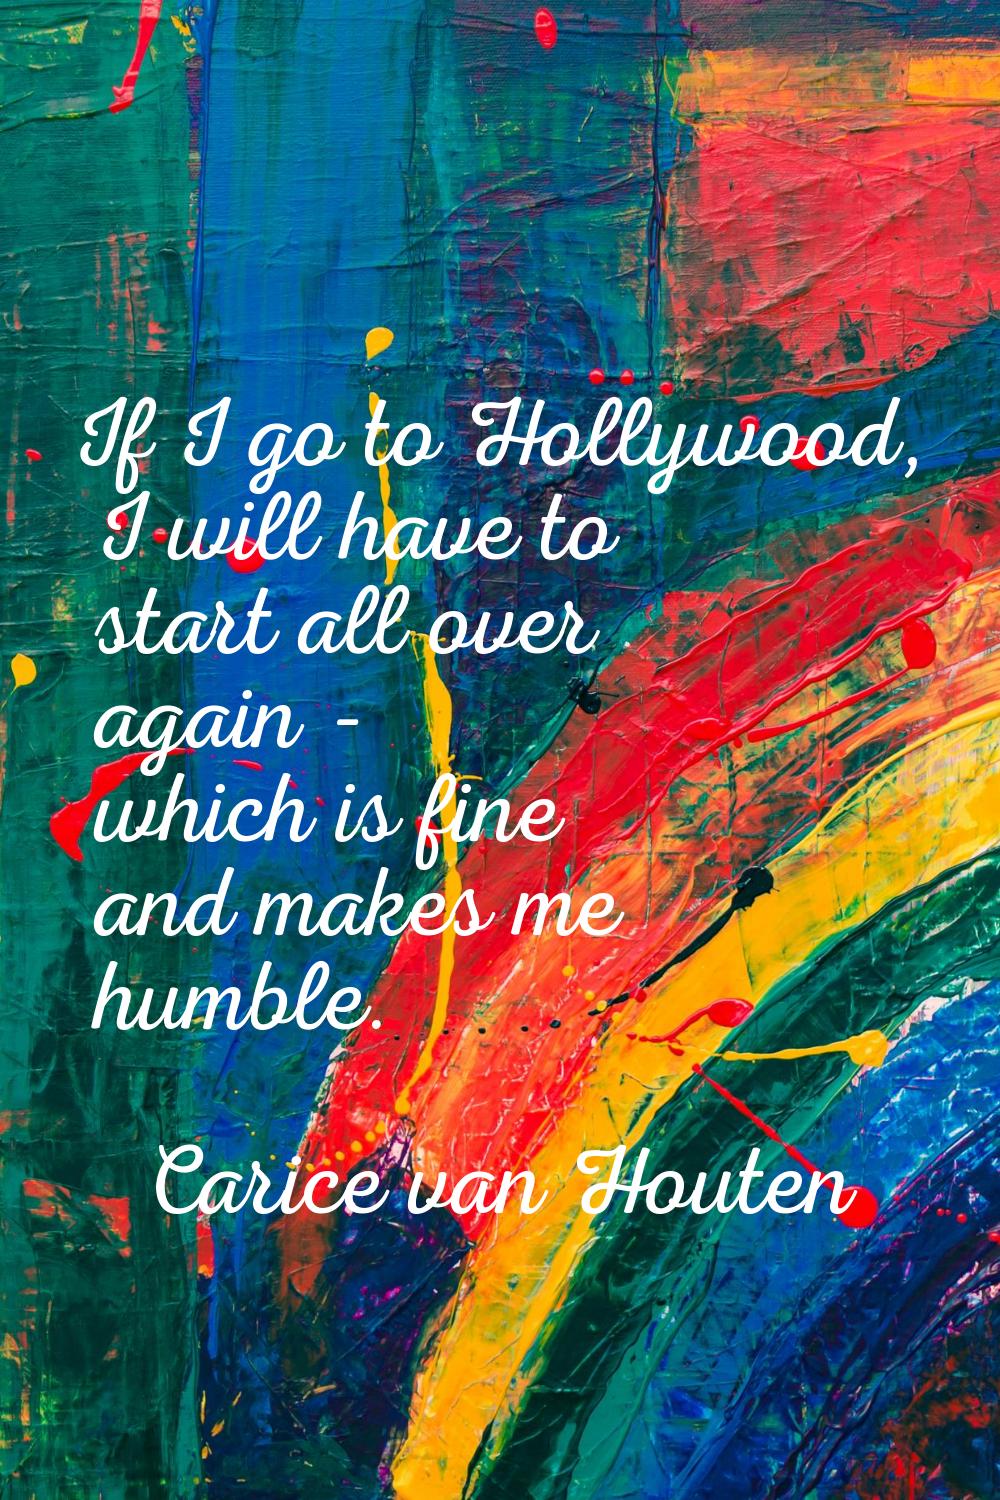 If I go to Hollywood, I will have to start all over again - which is fine and makes me humble.